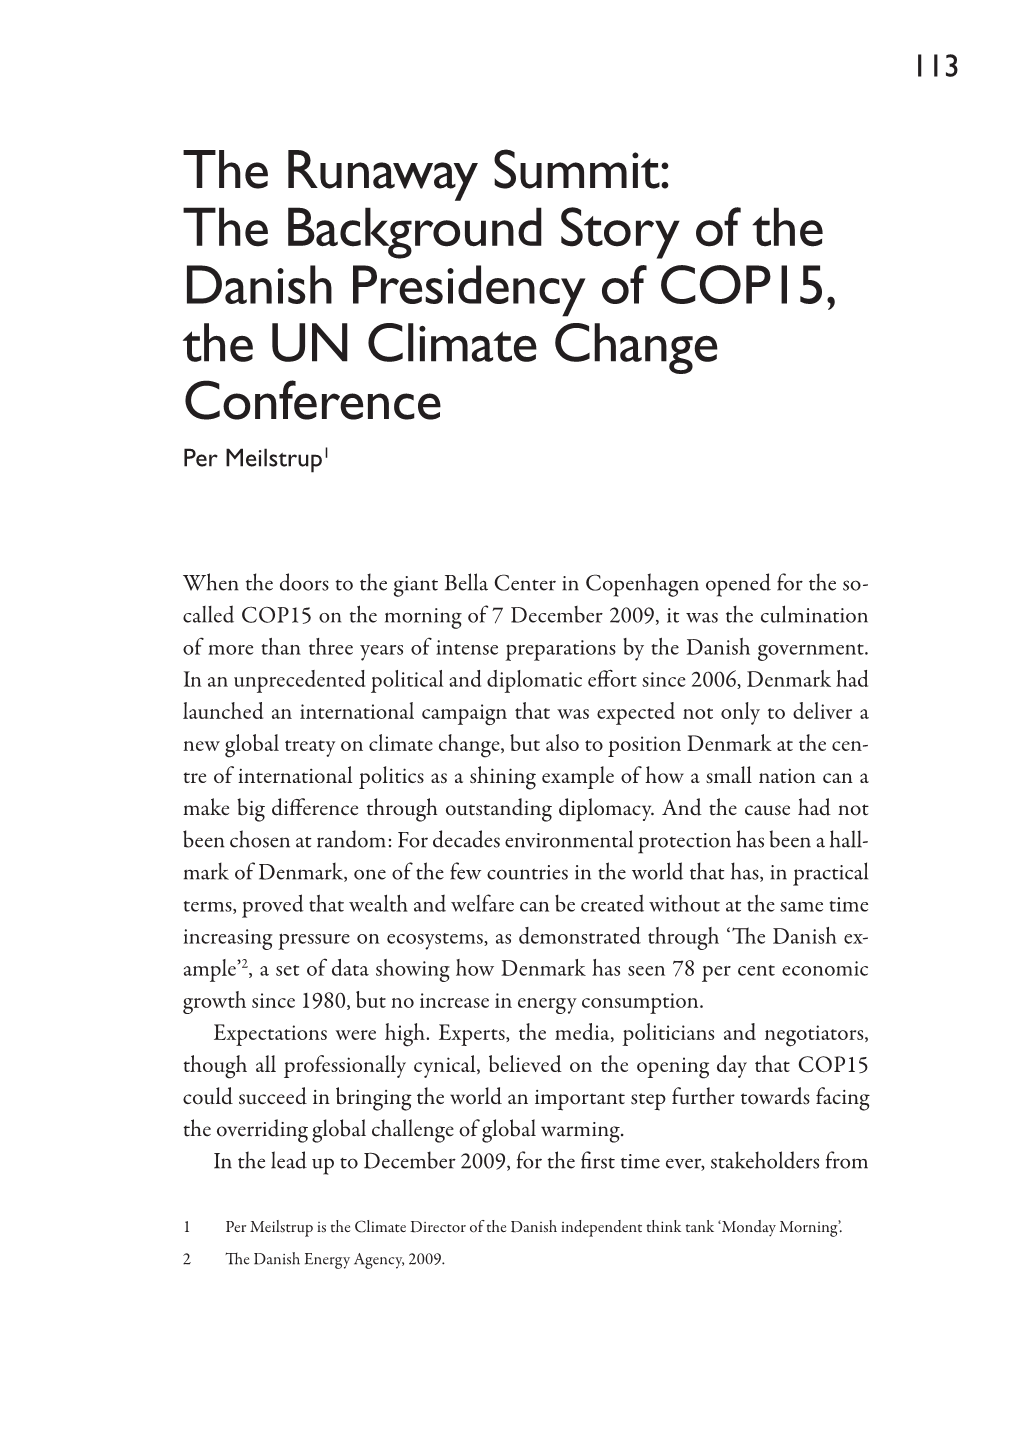 The Runaway Summit: the Background Story of the Danish Presidency of COP15, the UN Climate Change Conference